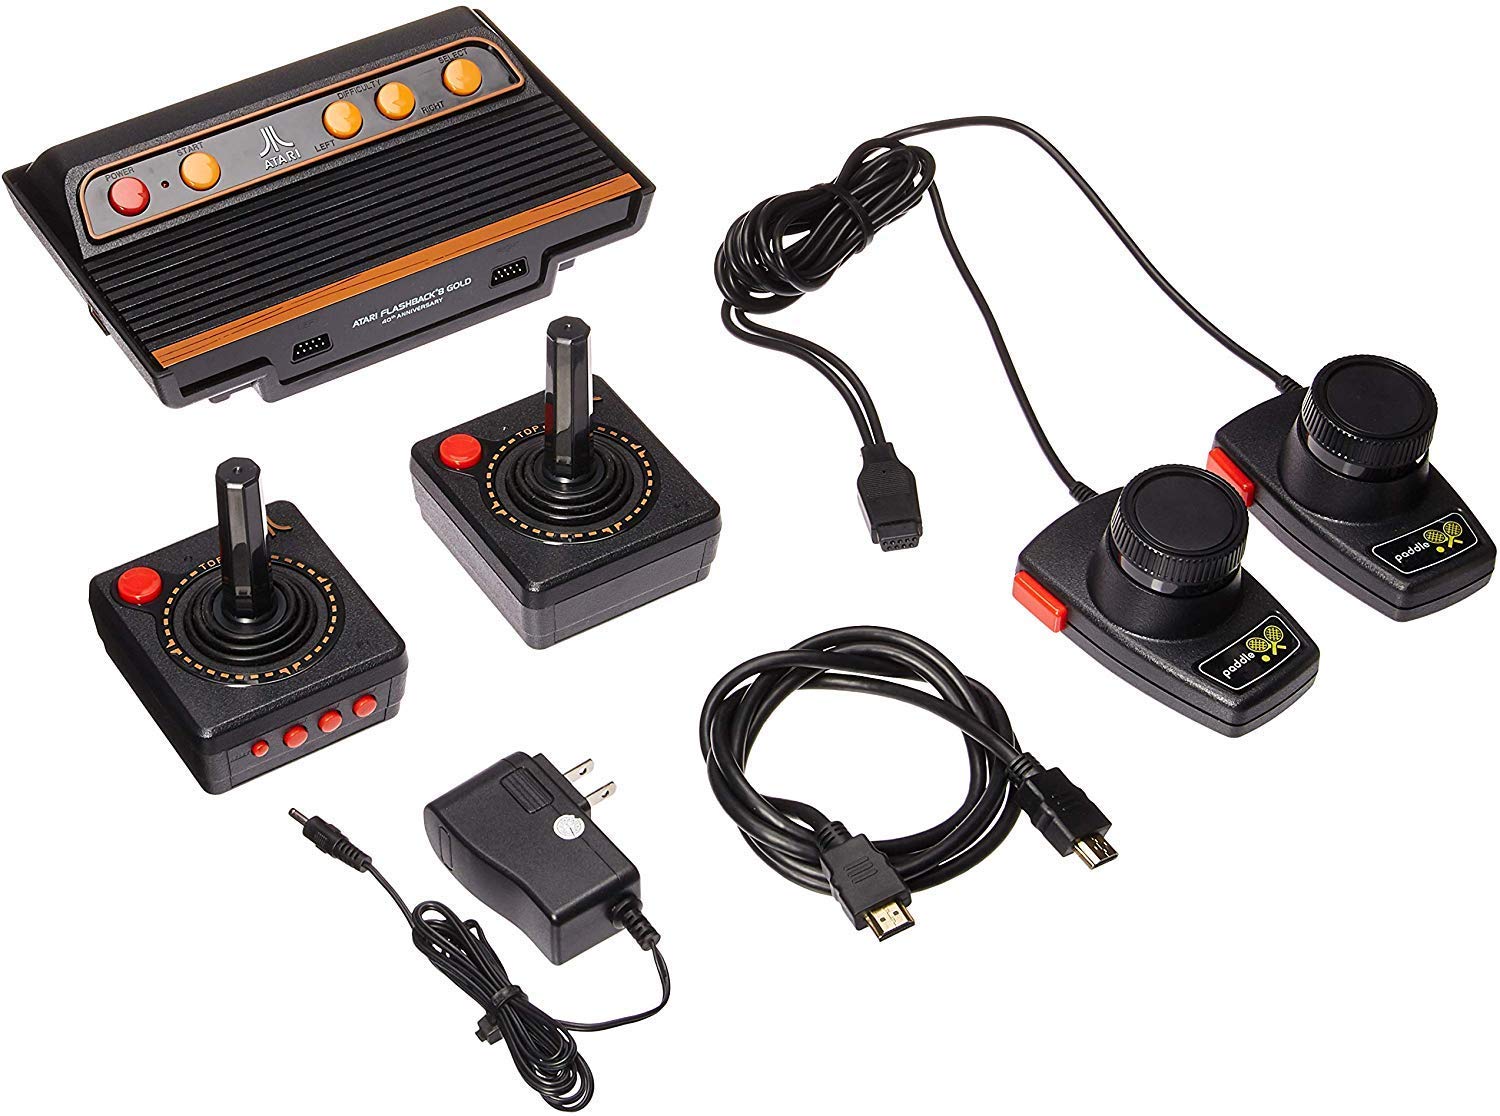 AtGames Atari Flashback 8 Gold Deluxe with 120 Games - Includes 2 Controllers and 2 Paddles - image 3 of 3